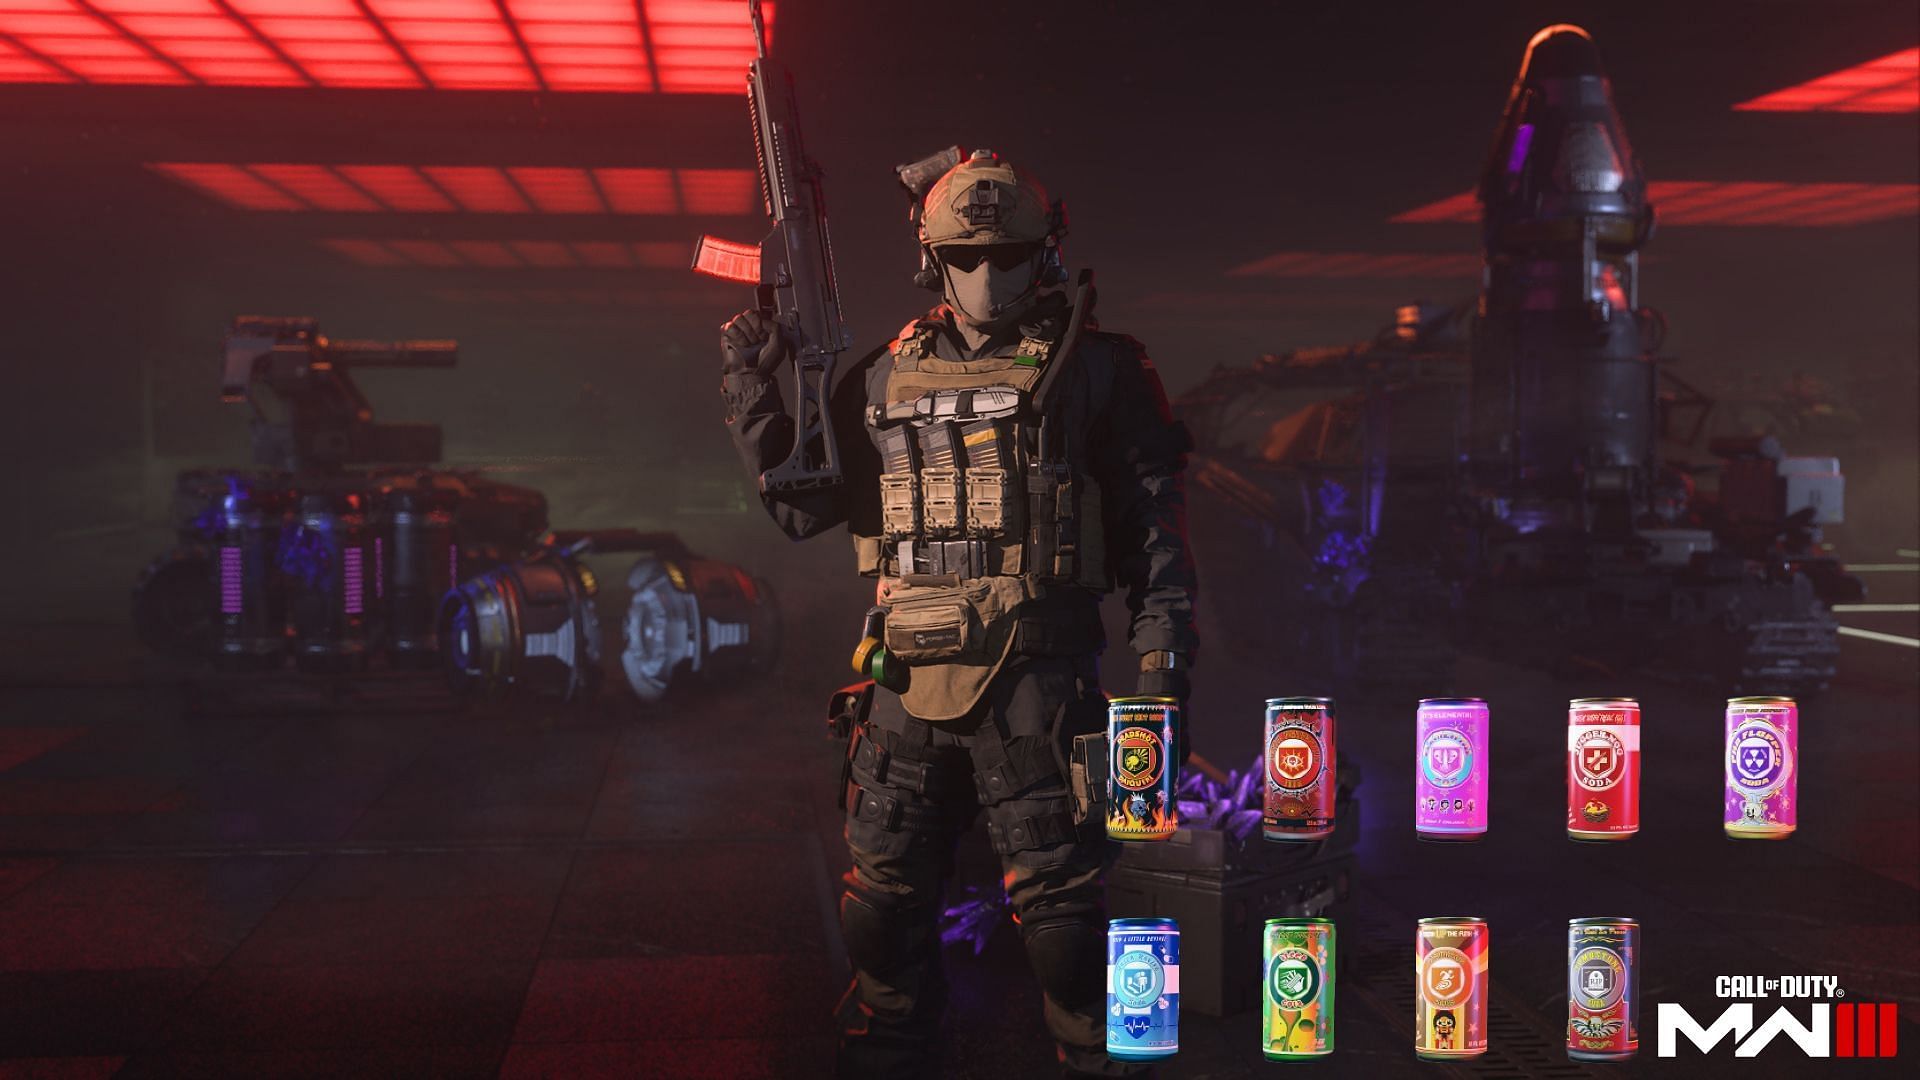 All Modern Warfare 3 Zombies (MW3) perks revealed: Deadshot Daiquiri,  Elemental Pop, Speed Cola, and more